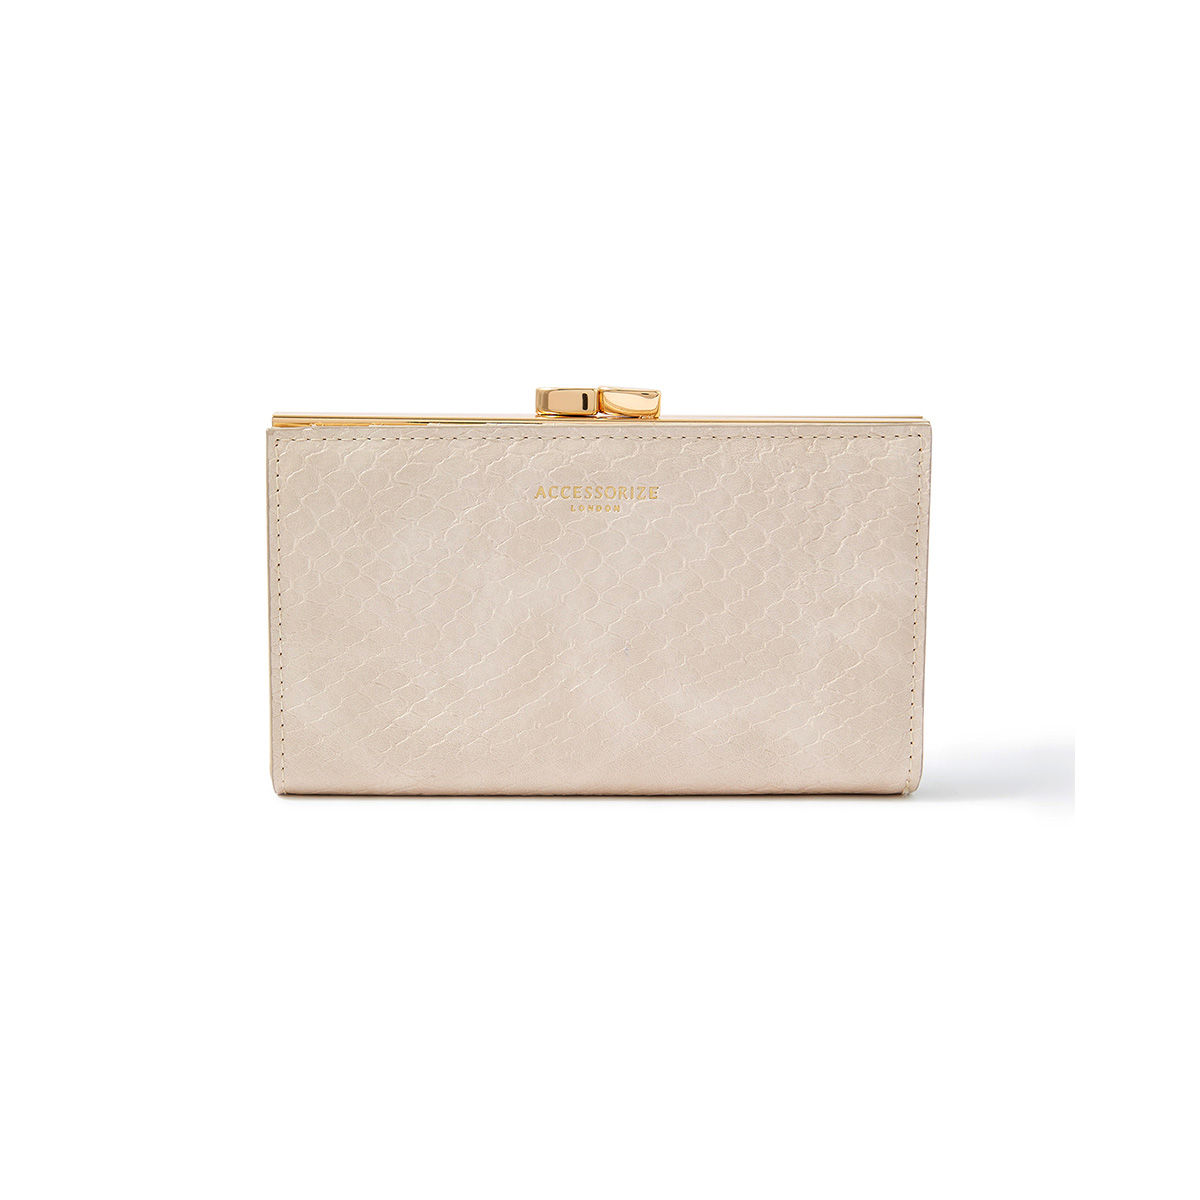 Linea pelle Pouch Bag cream casual look Bags Pouch Bags 